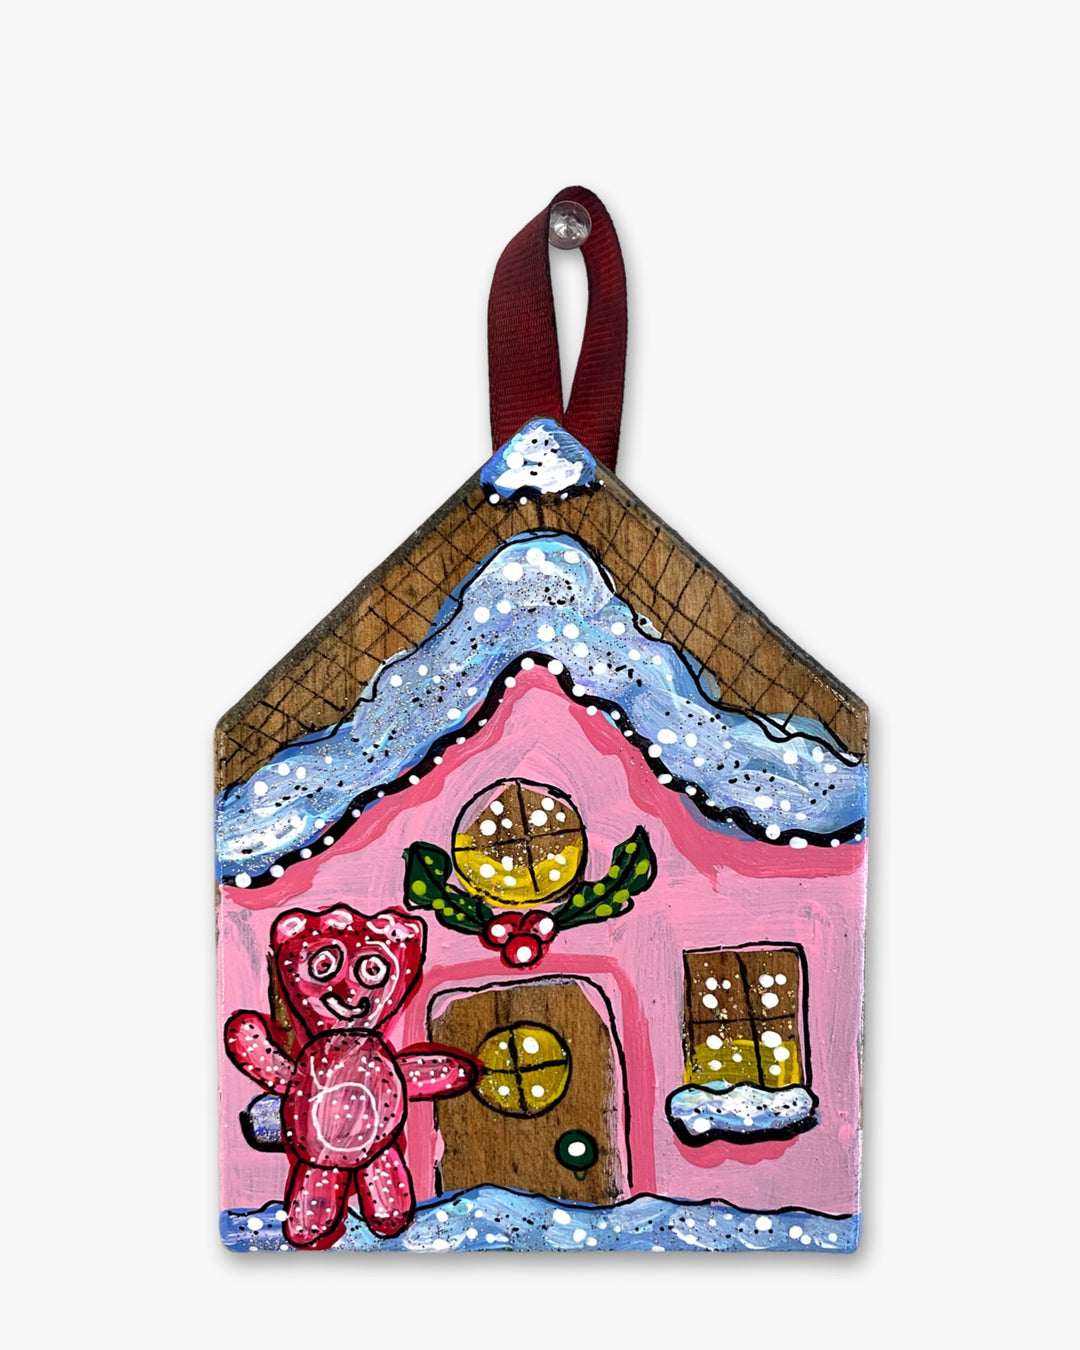 Sour Kid Pink Frosting Gingerbread House - Hand Painted Ornament - Heather Freitas 